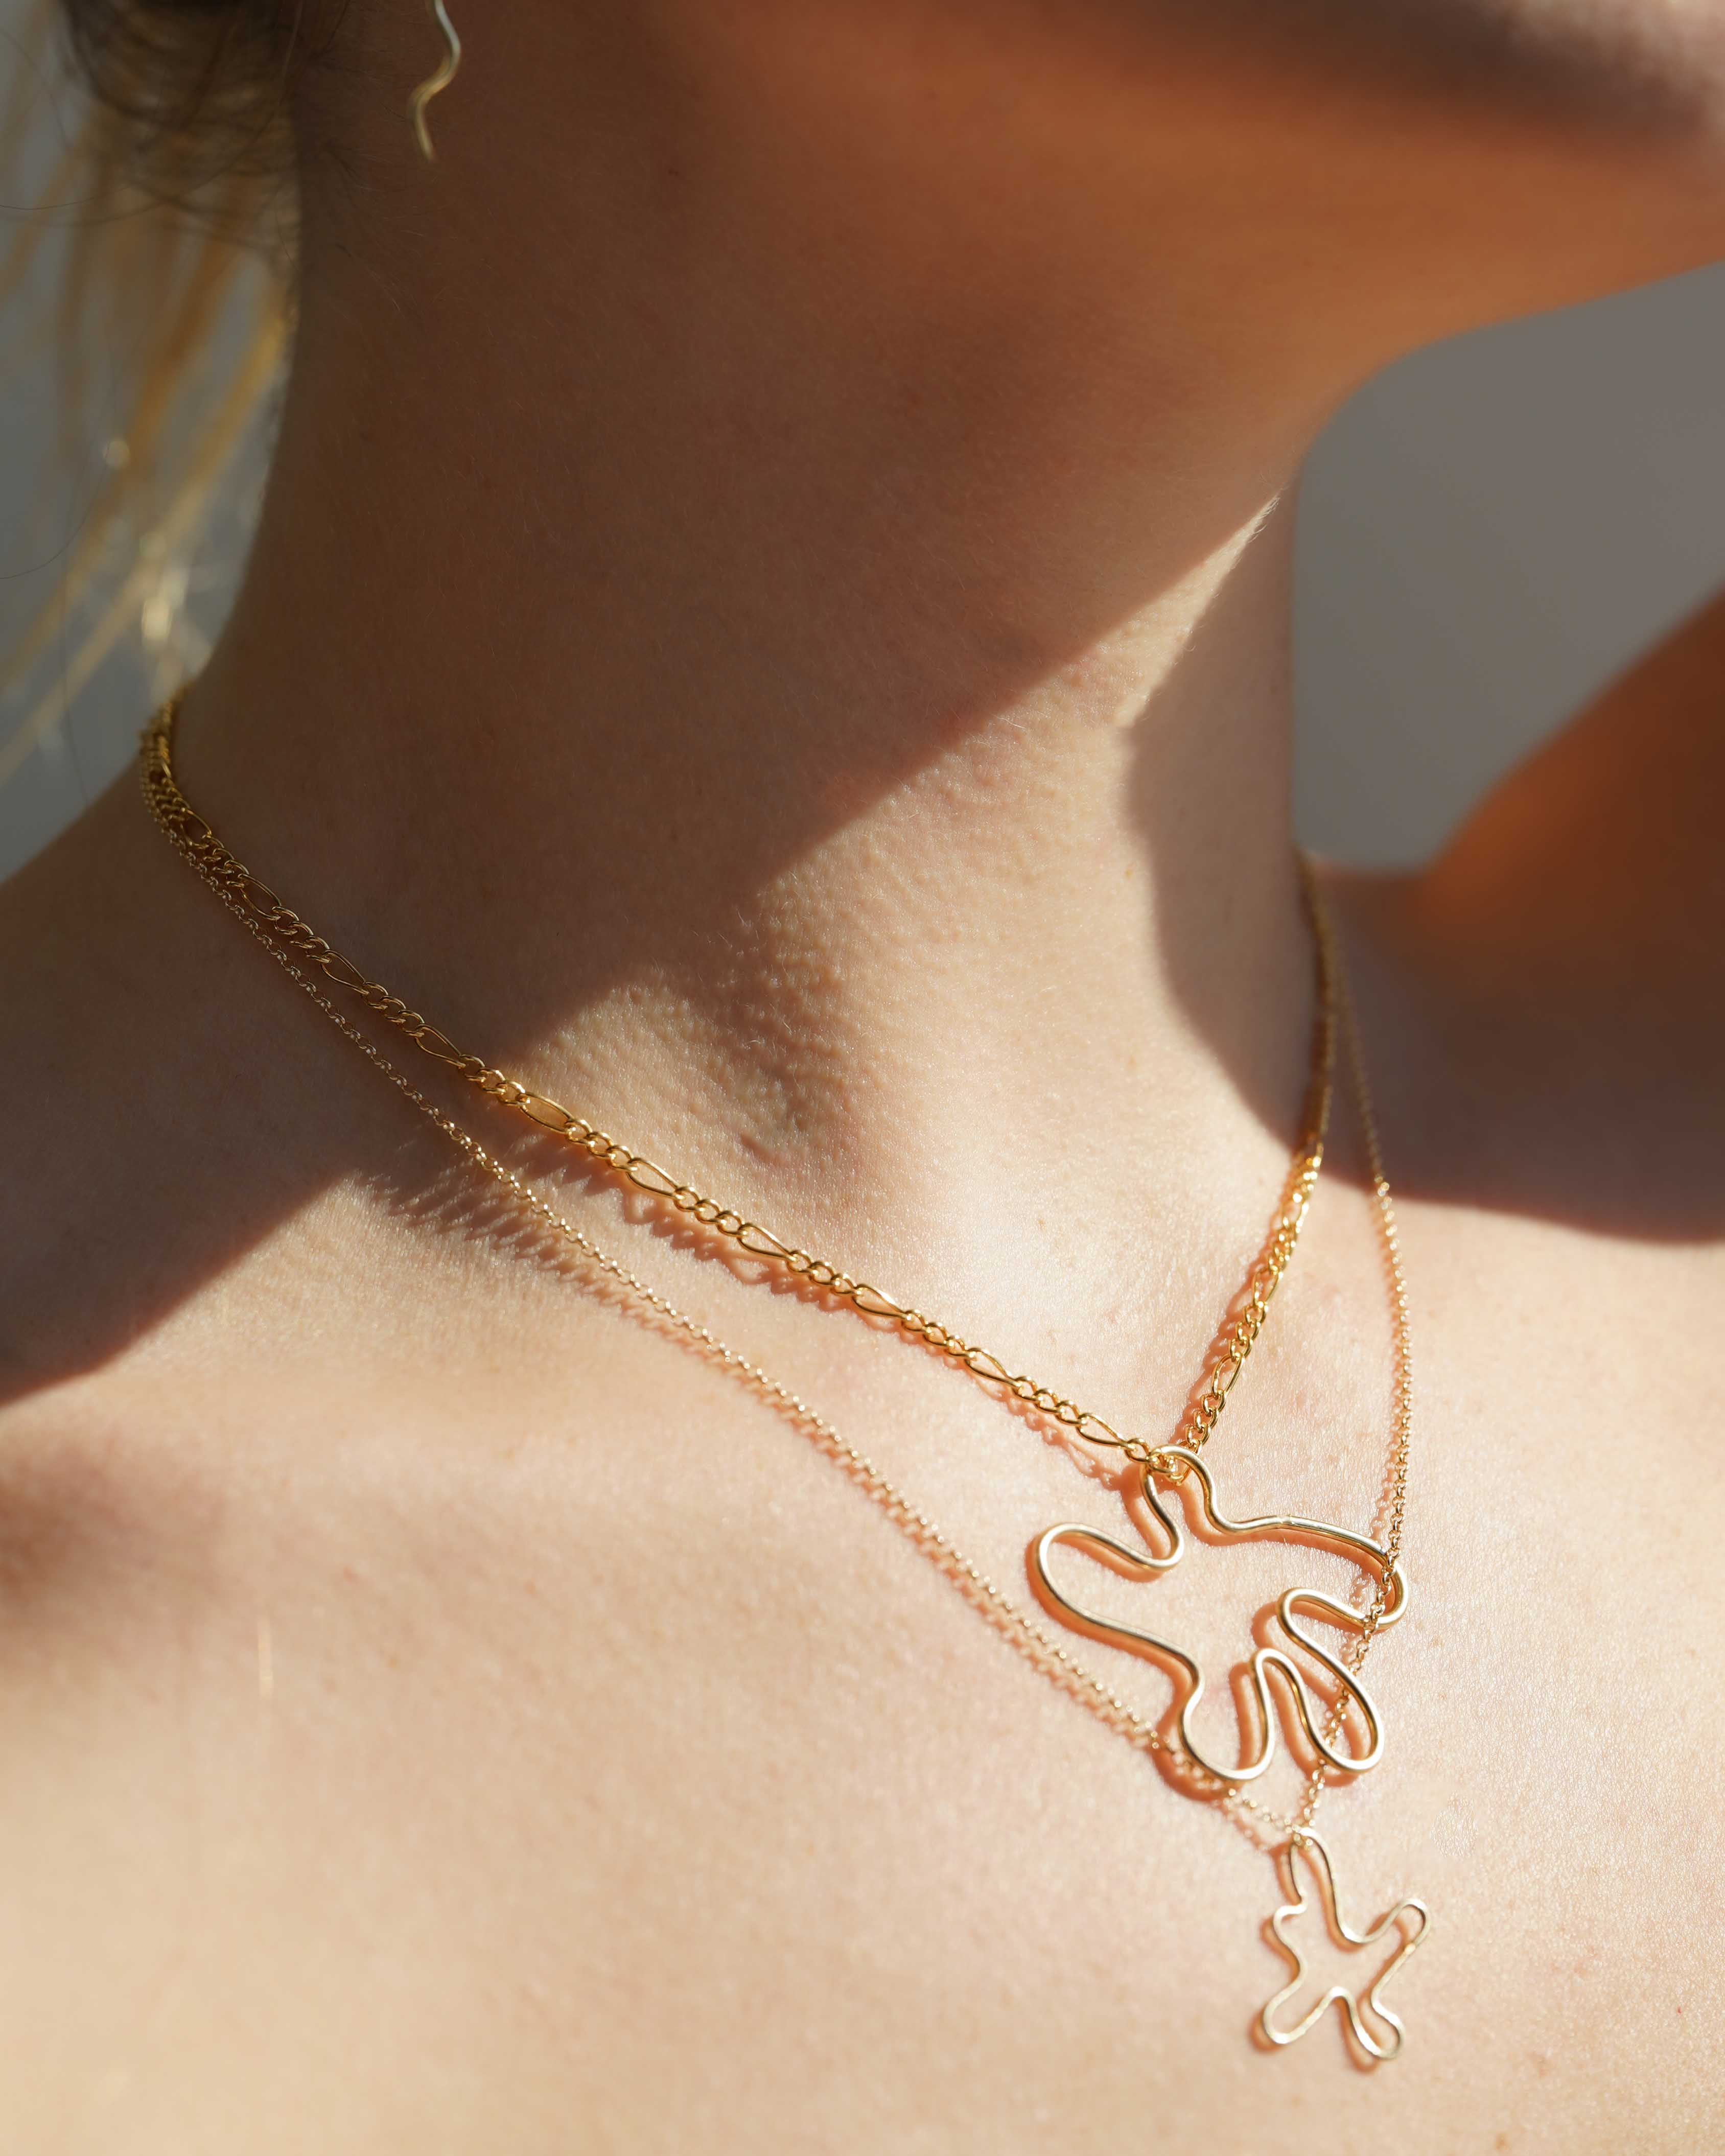 Little Squiggly Necklace